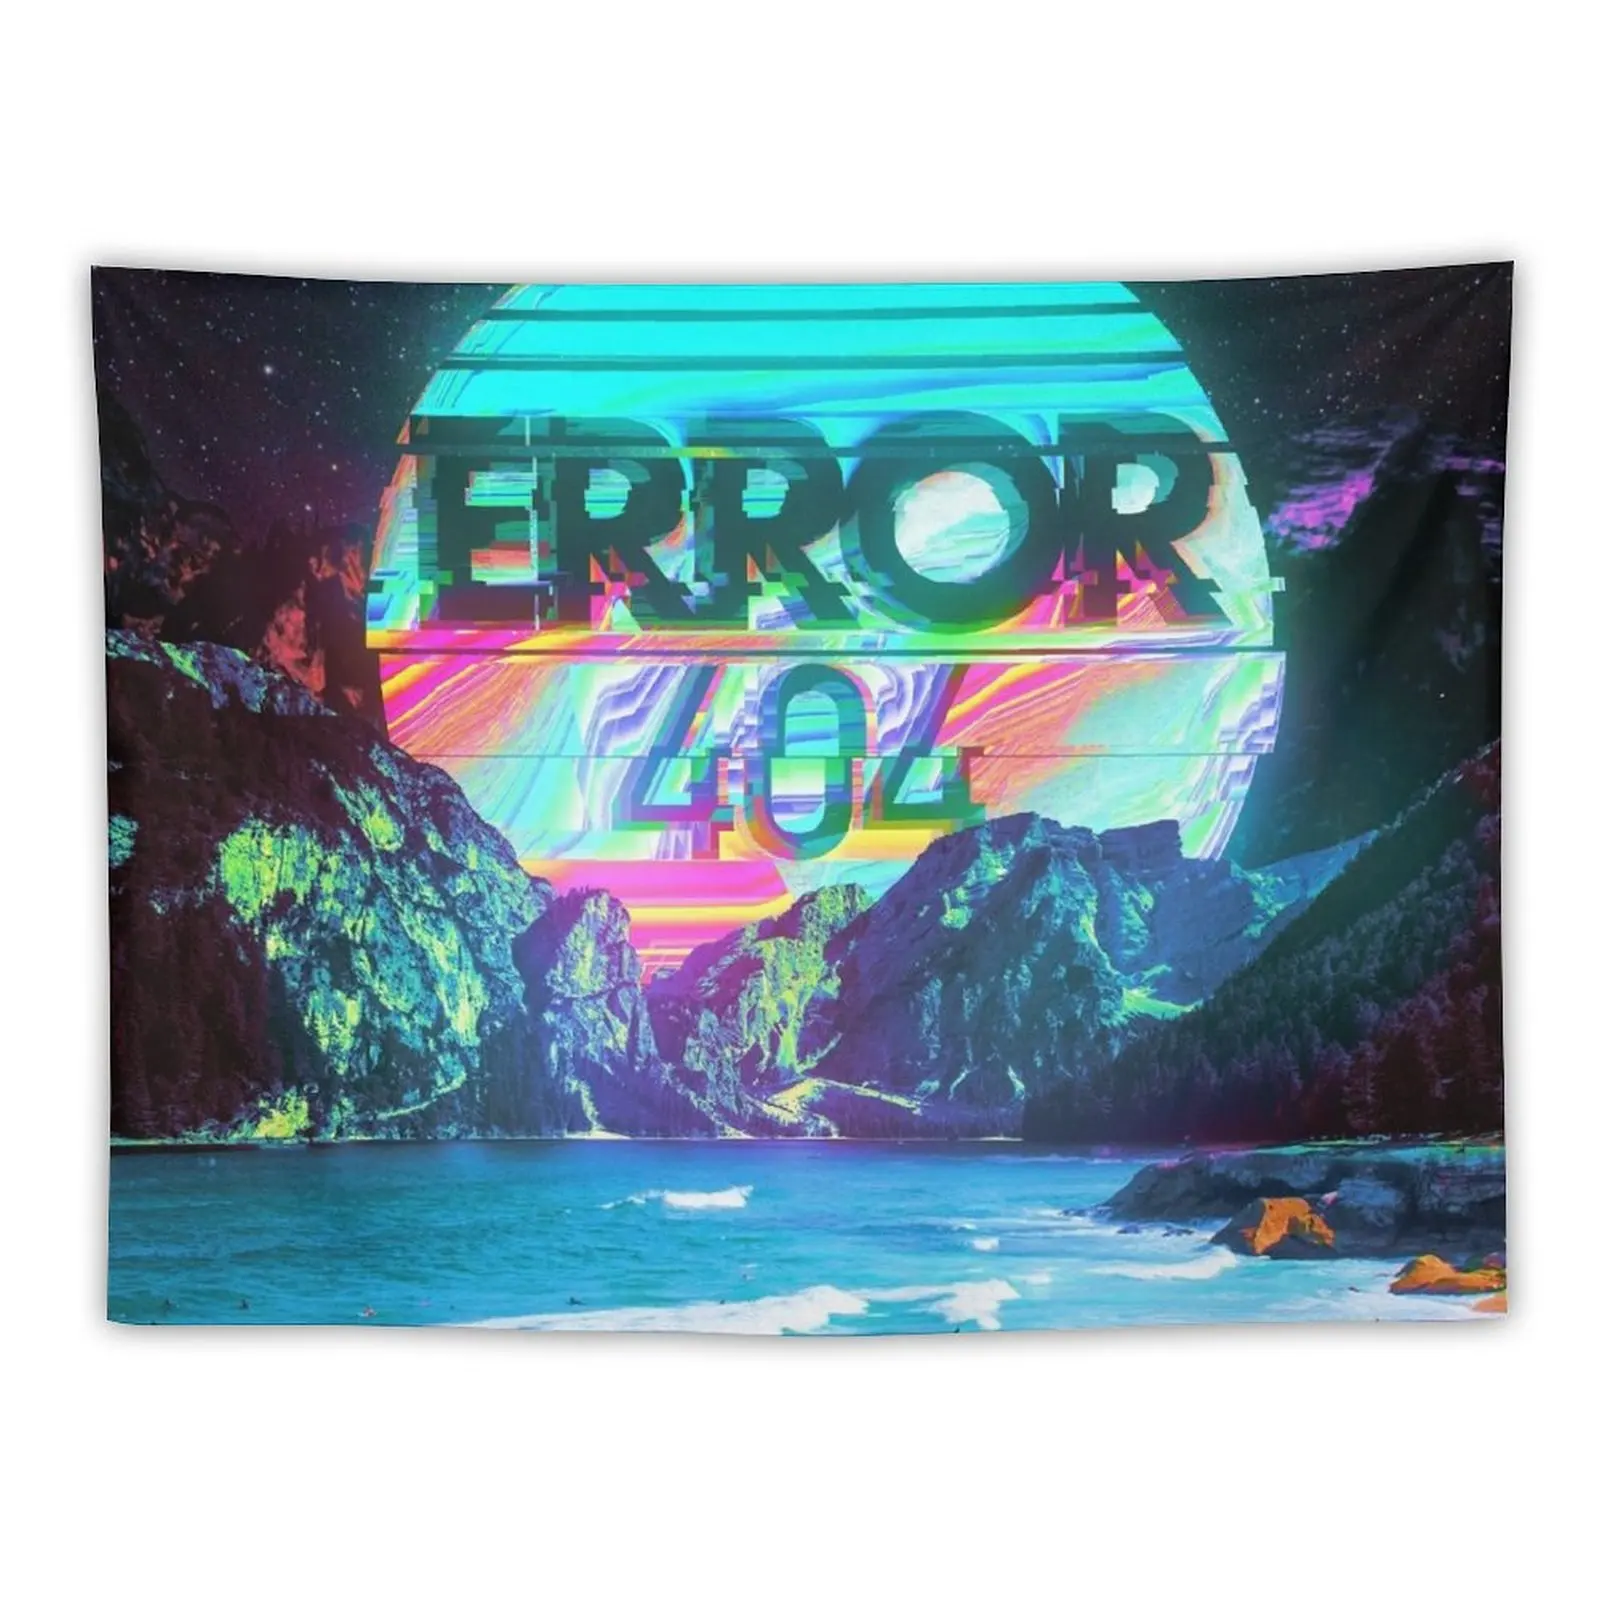 

Error 404 Tapestry Luxury Living Room Decoration Carpet On The Wall Aesthetics For Room Bedroom